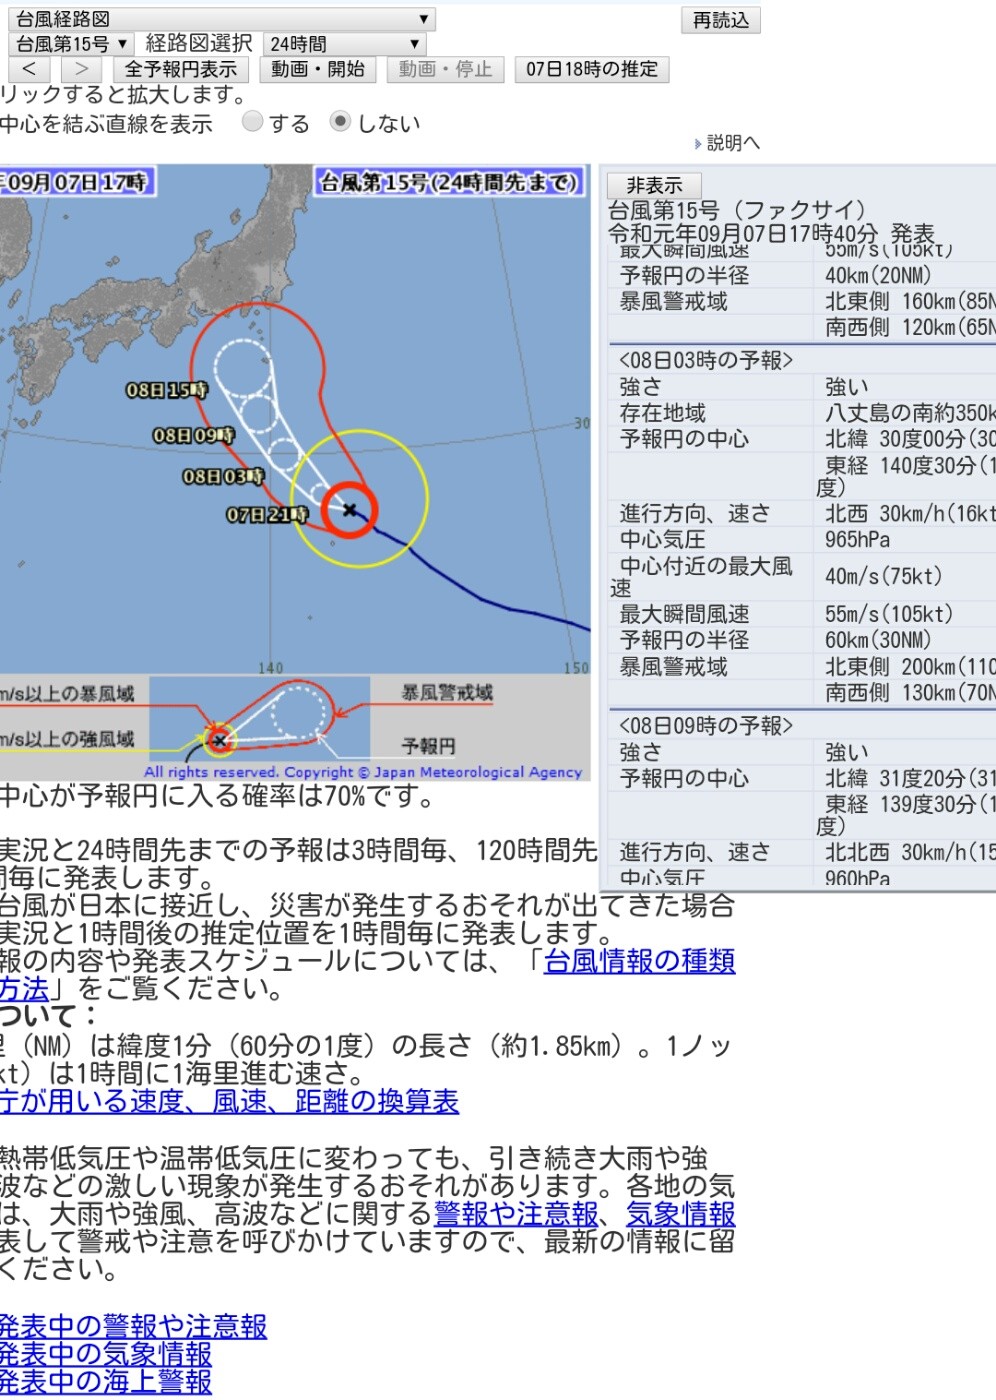 [Breaking news] Typhoon No. 15 Faxai, developing like no other like a demon, to hit the Tokyo metropolitan area with the worst route tomorrow